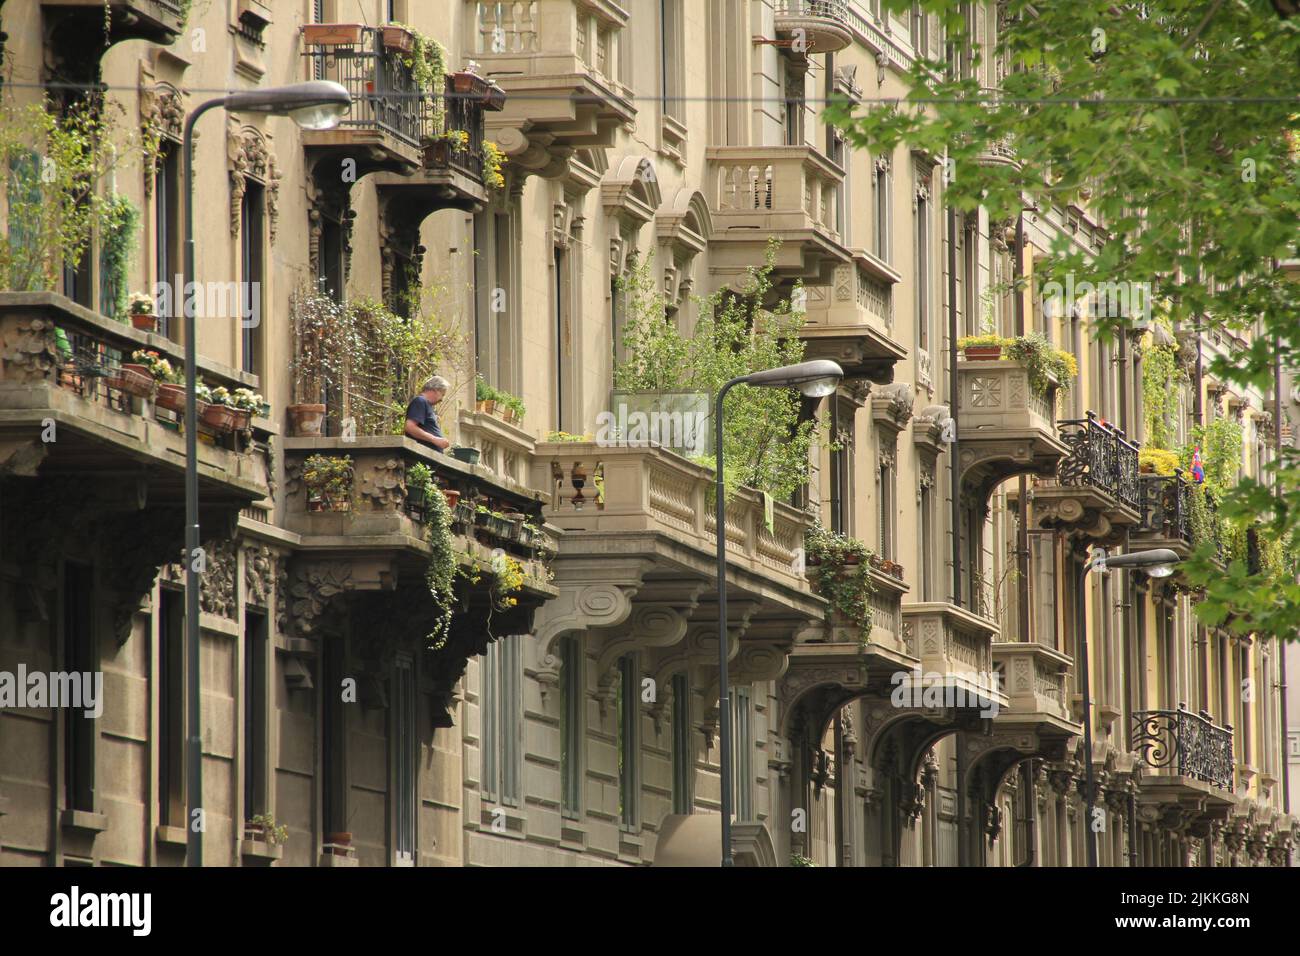 The facade of a beautiful, ornamental building with balconies in Milan Stock Photo